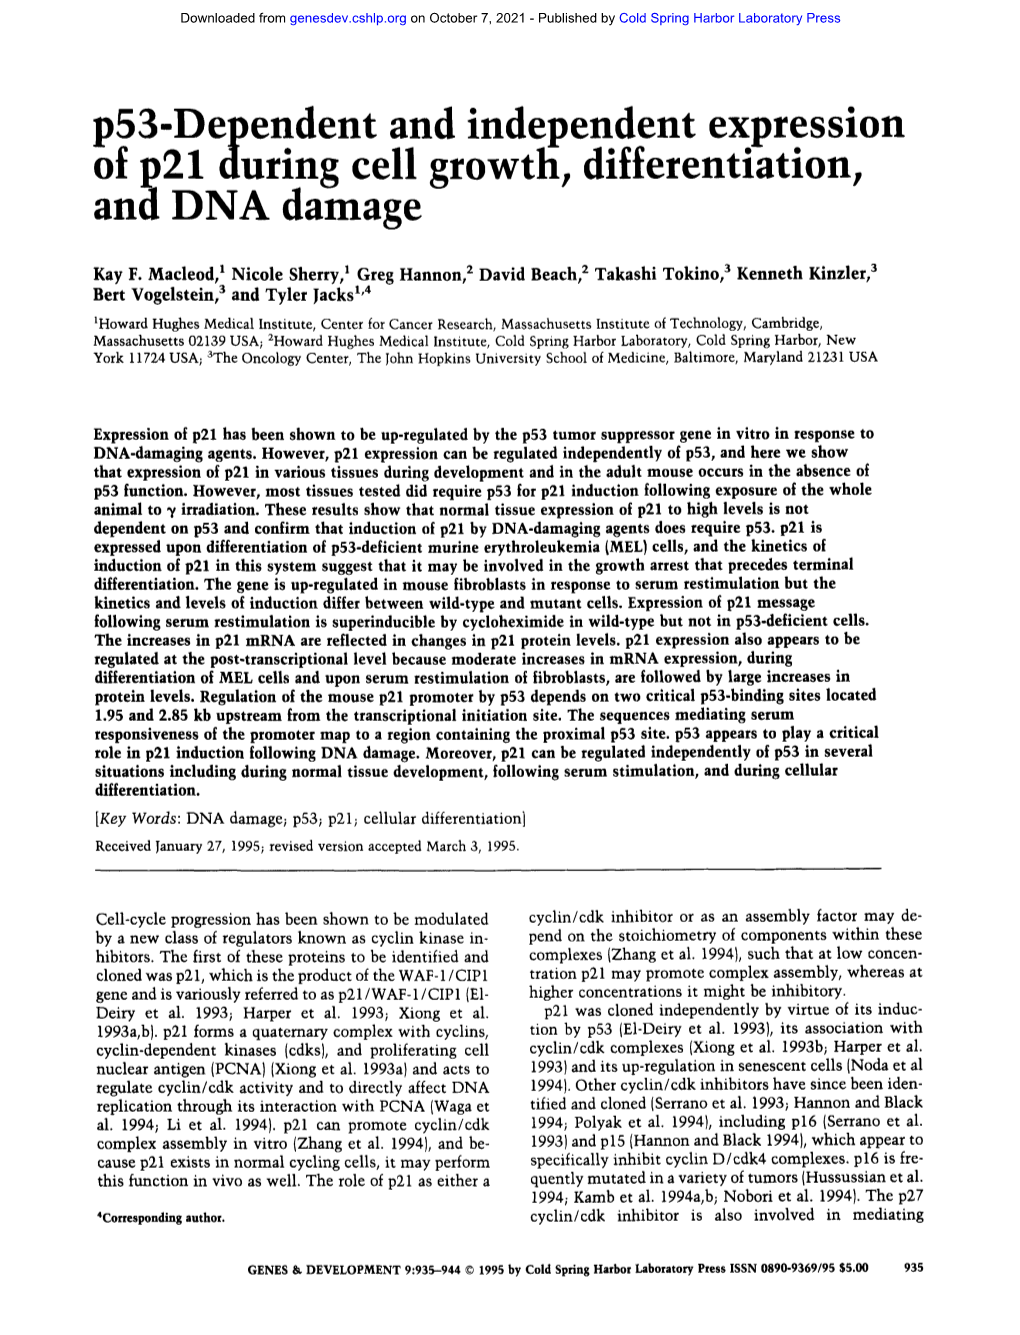 P53-Dependent and Independent Expression of P21 During Cell Growth, Differentiation, and DNA Damage